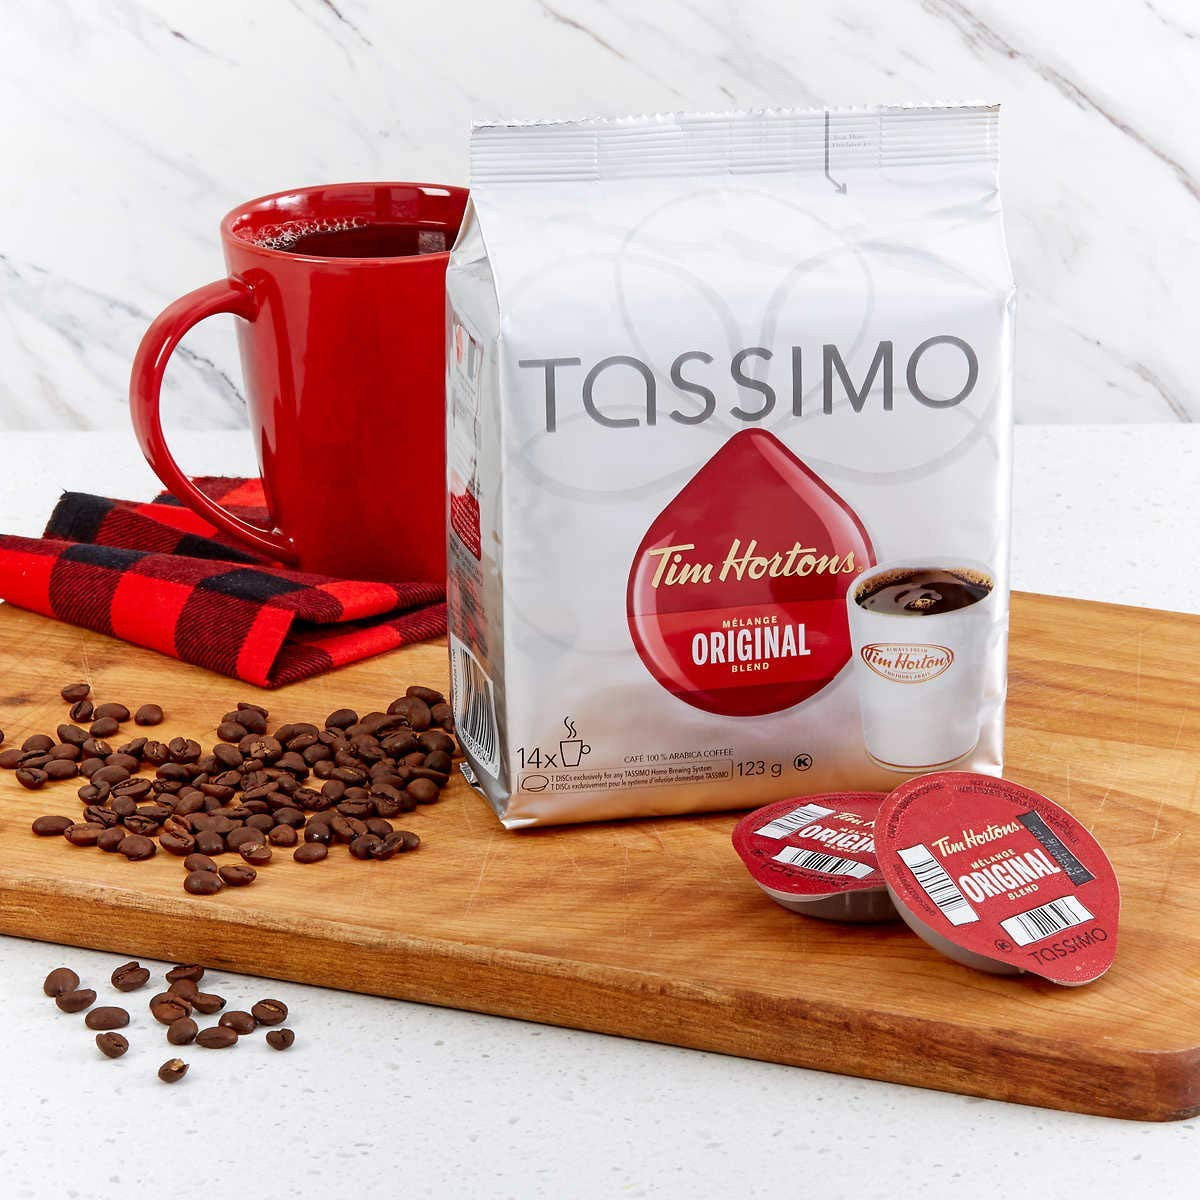 Tassimo Nabob Cappuccino Coffee Single Serve T-Discs (5 Boxes of 8 T-Discs)  {Imported from Canada}